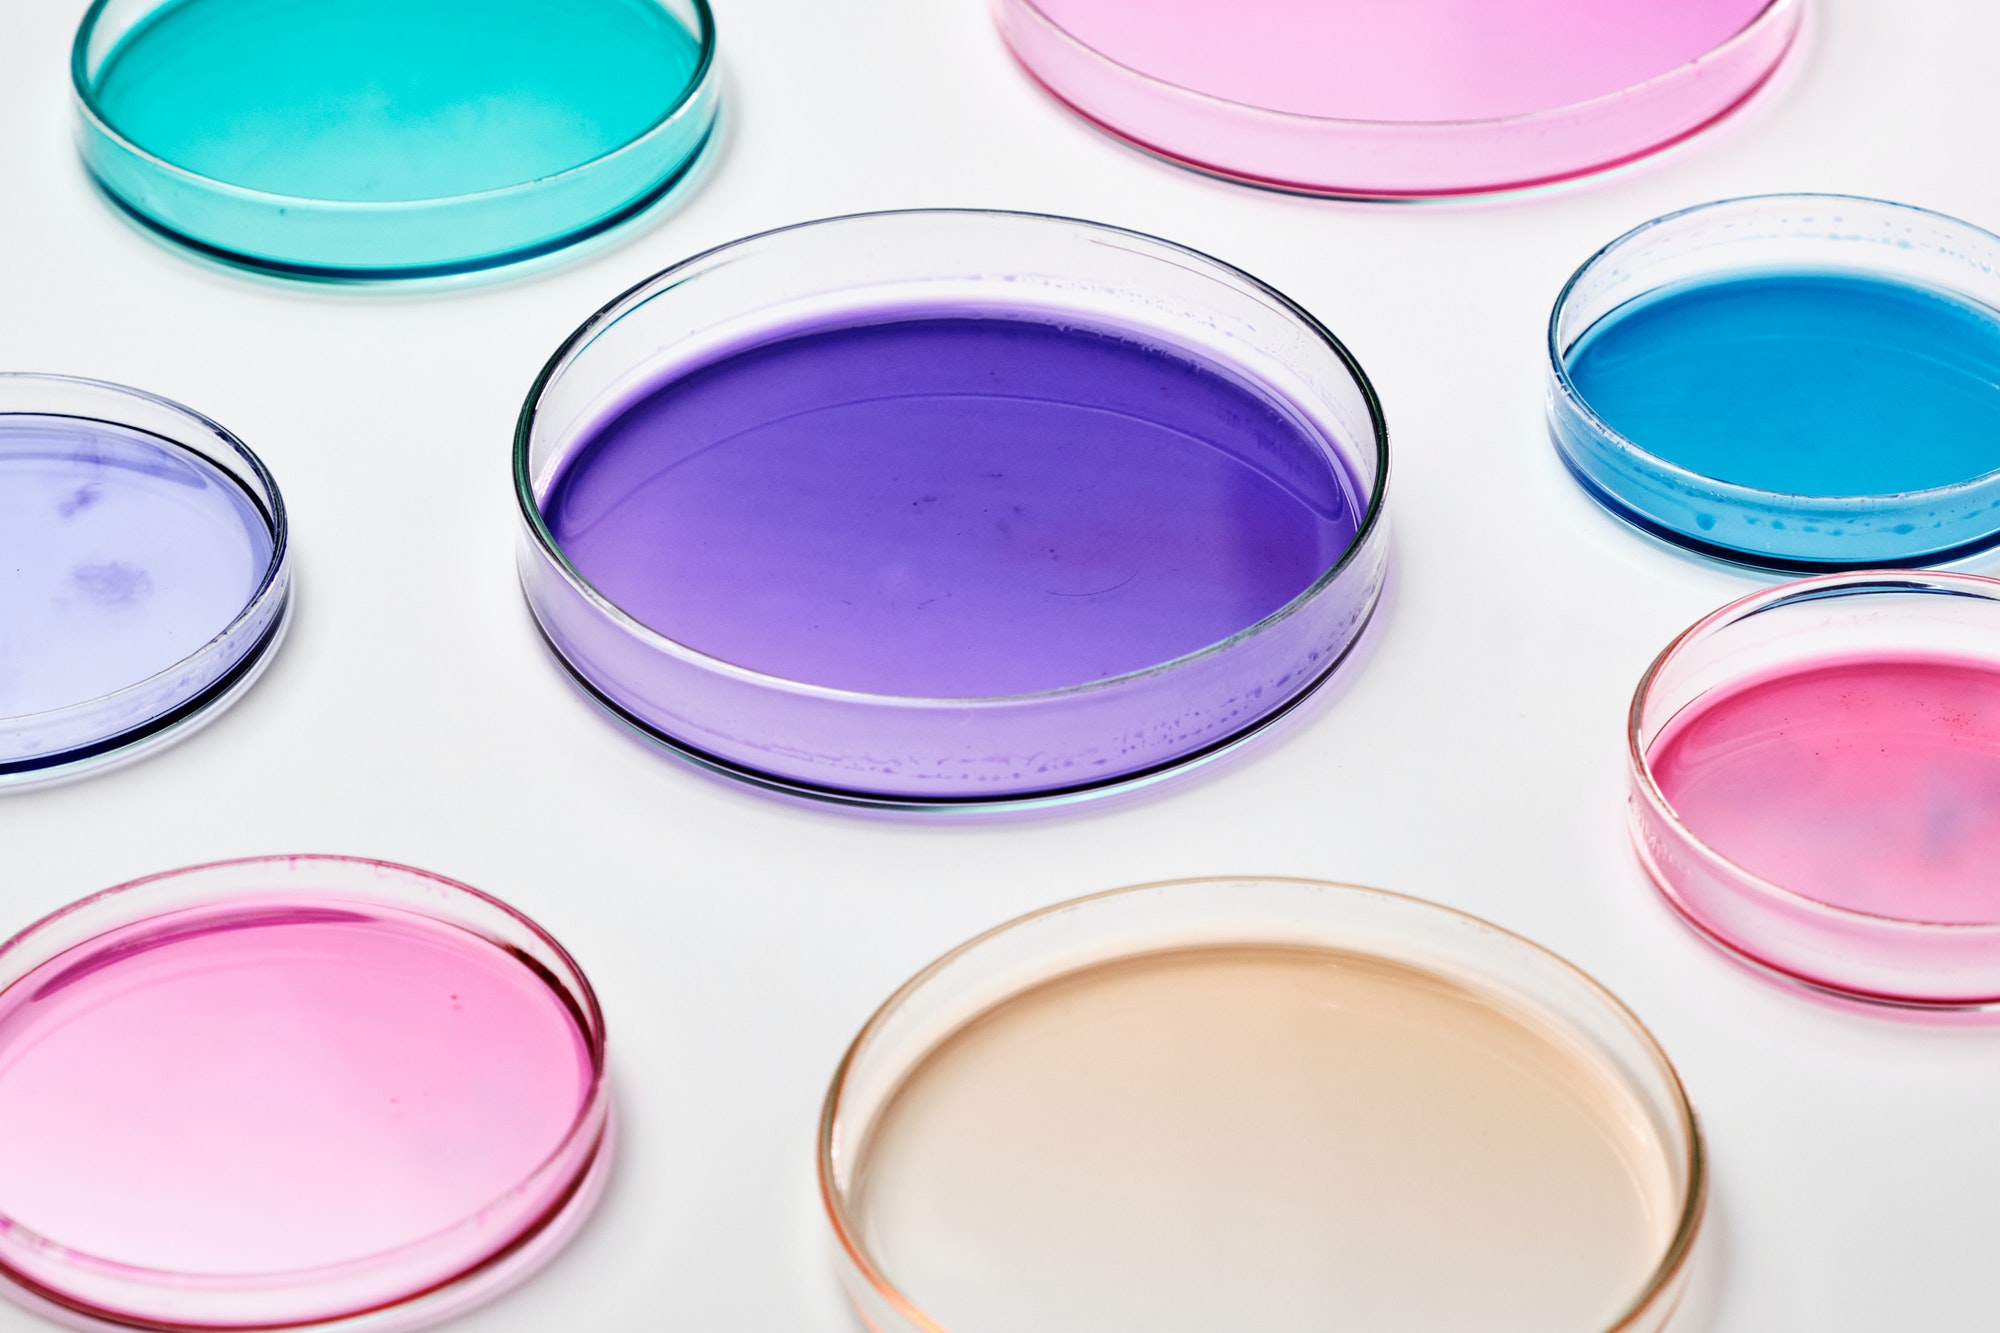 Colorful Petri dish with media in a microbiology laboratory. Chemical research with different